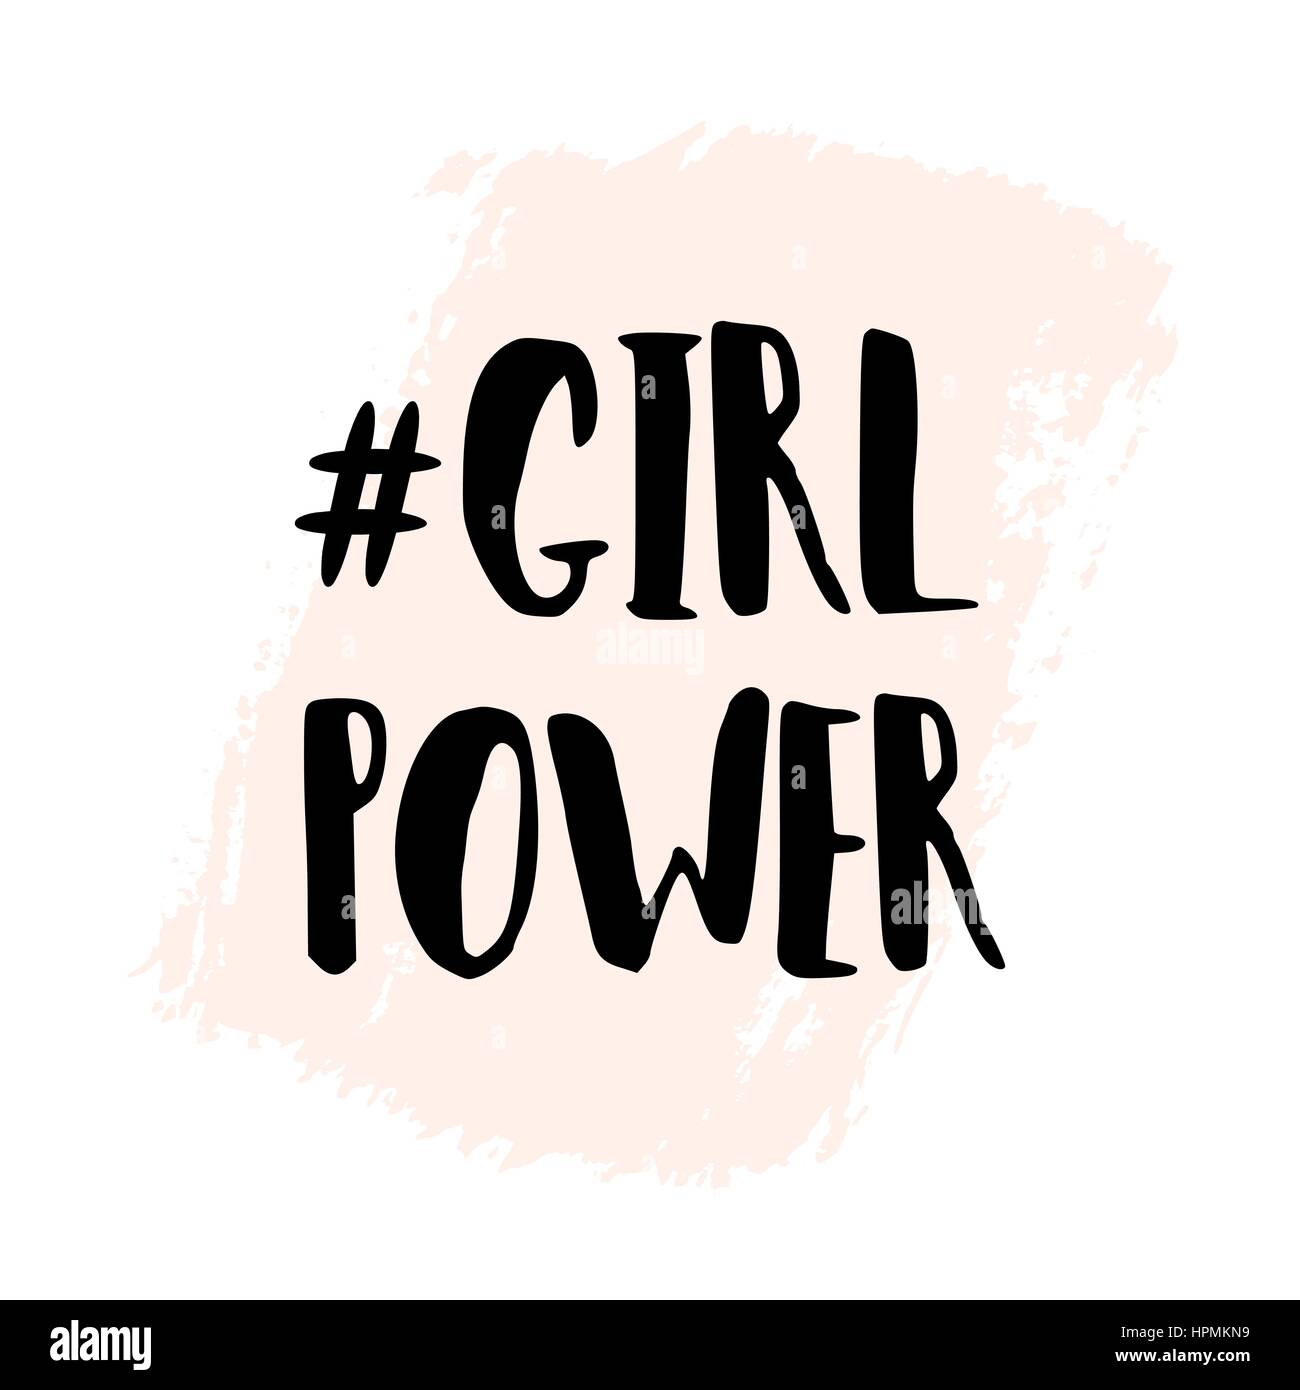 Girl Power - inspirational quote poster design. Hand lettered text in black with pale pink brush stroke on white. Stock Vector